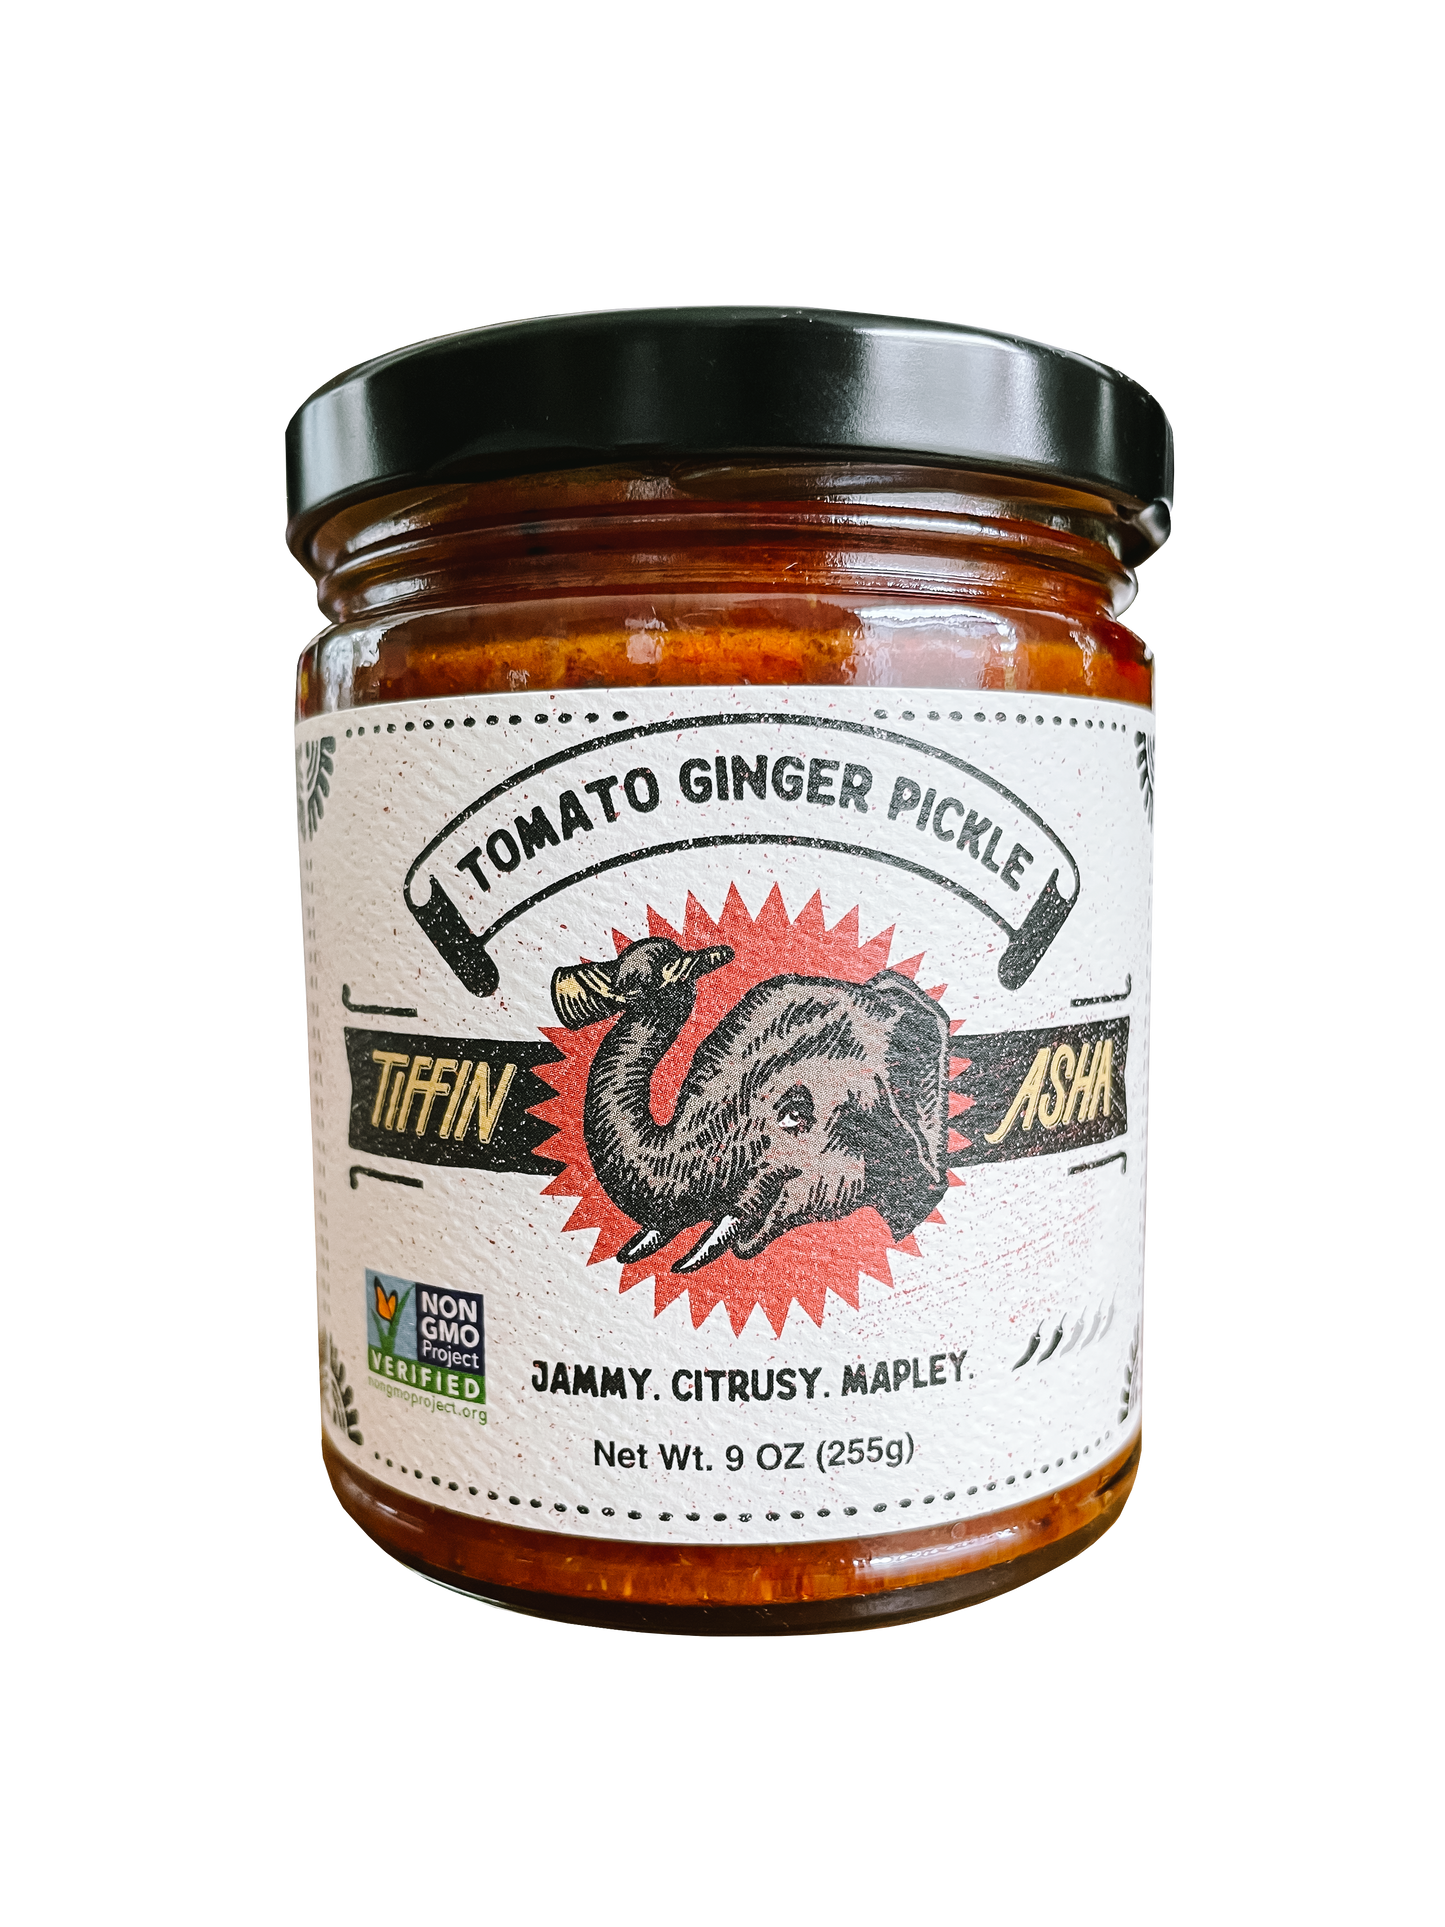 9 oz glass jar with black lid. Label reads: Tiffin Asha, with an elephant head and its trunk holding a dosa, Tomato Ginger Pickle, NON GMO project VERIFIED, tasting notes read: jammy, citrusy, mapley, shows 2 chili peppers for heat level.